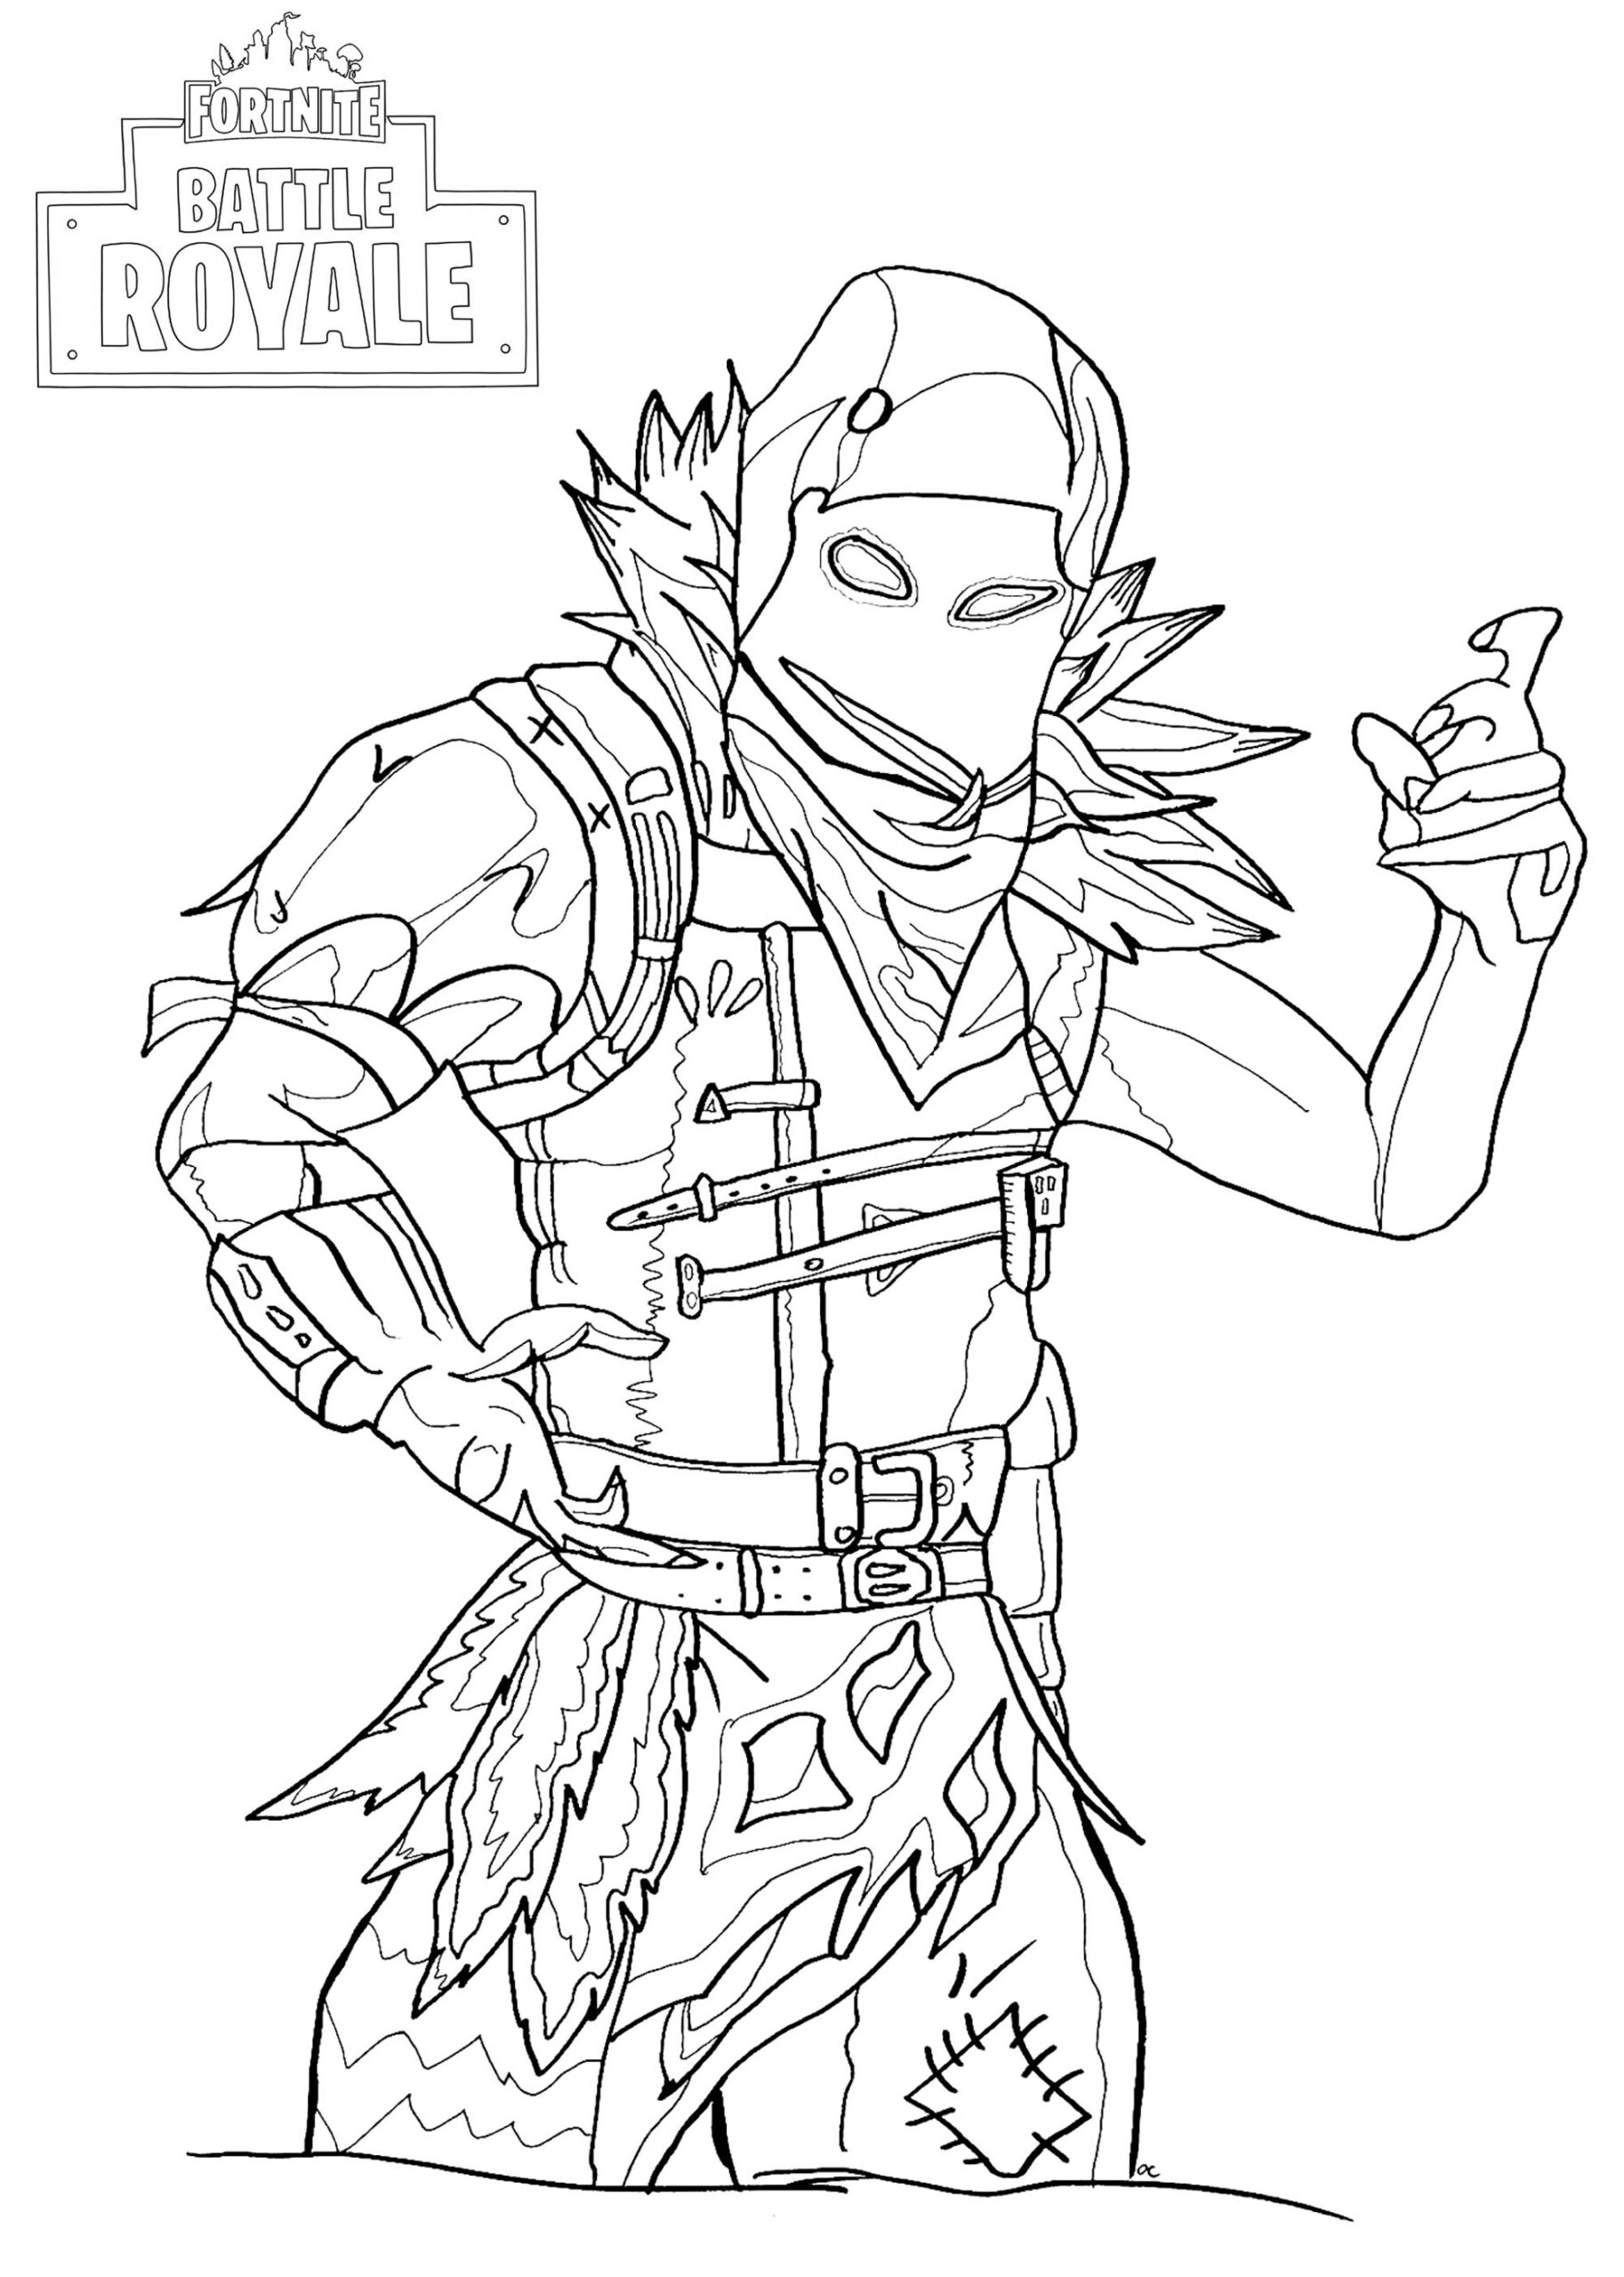 Top 10 Fortnite Coloring Pages Free COLORING PAGES FOR KIDS FREE